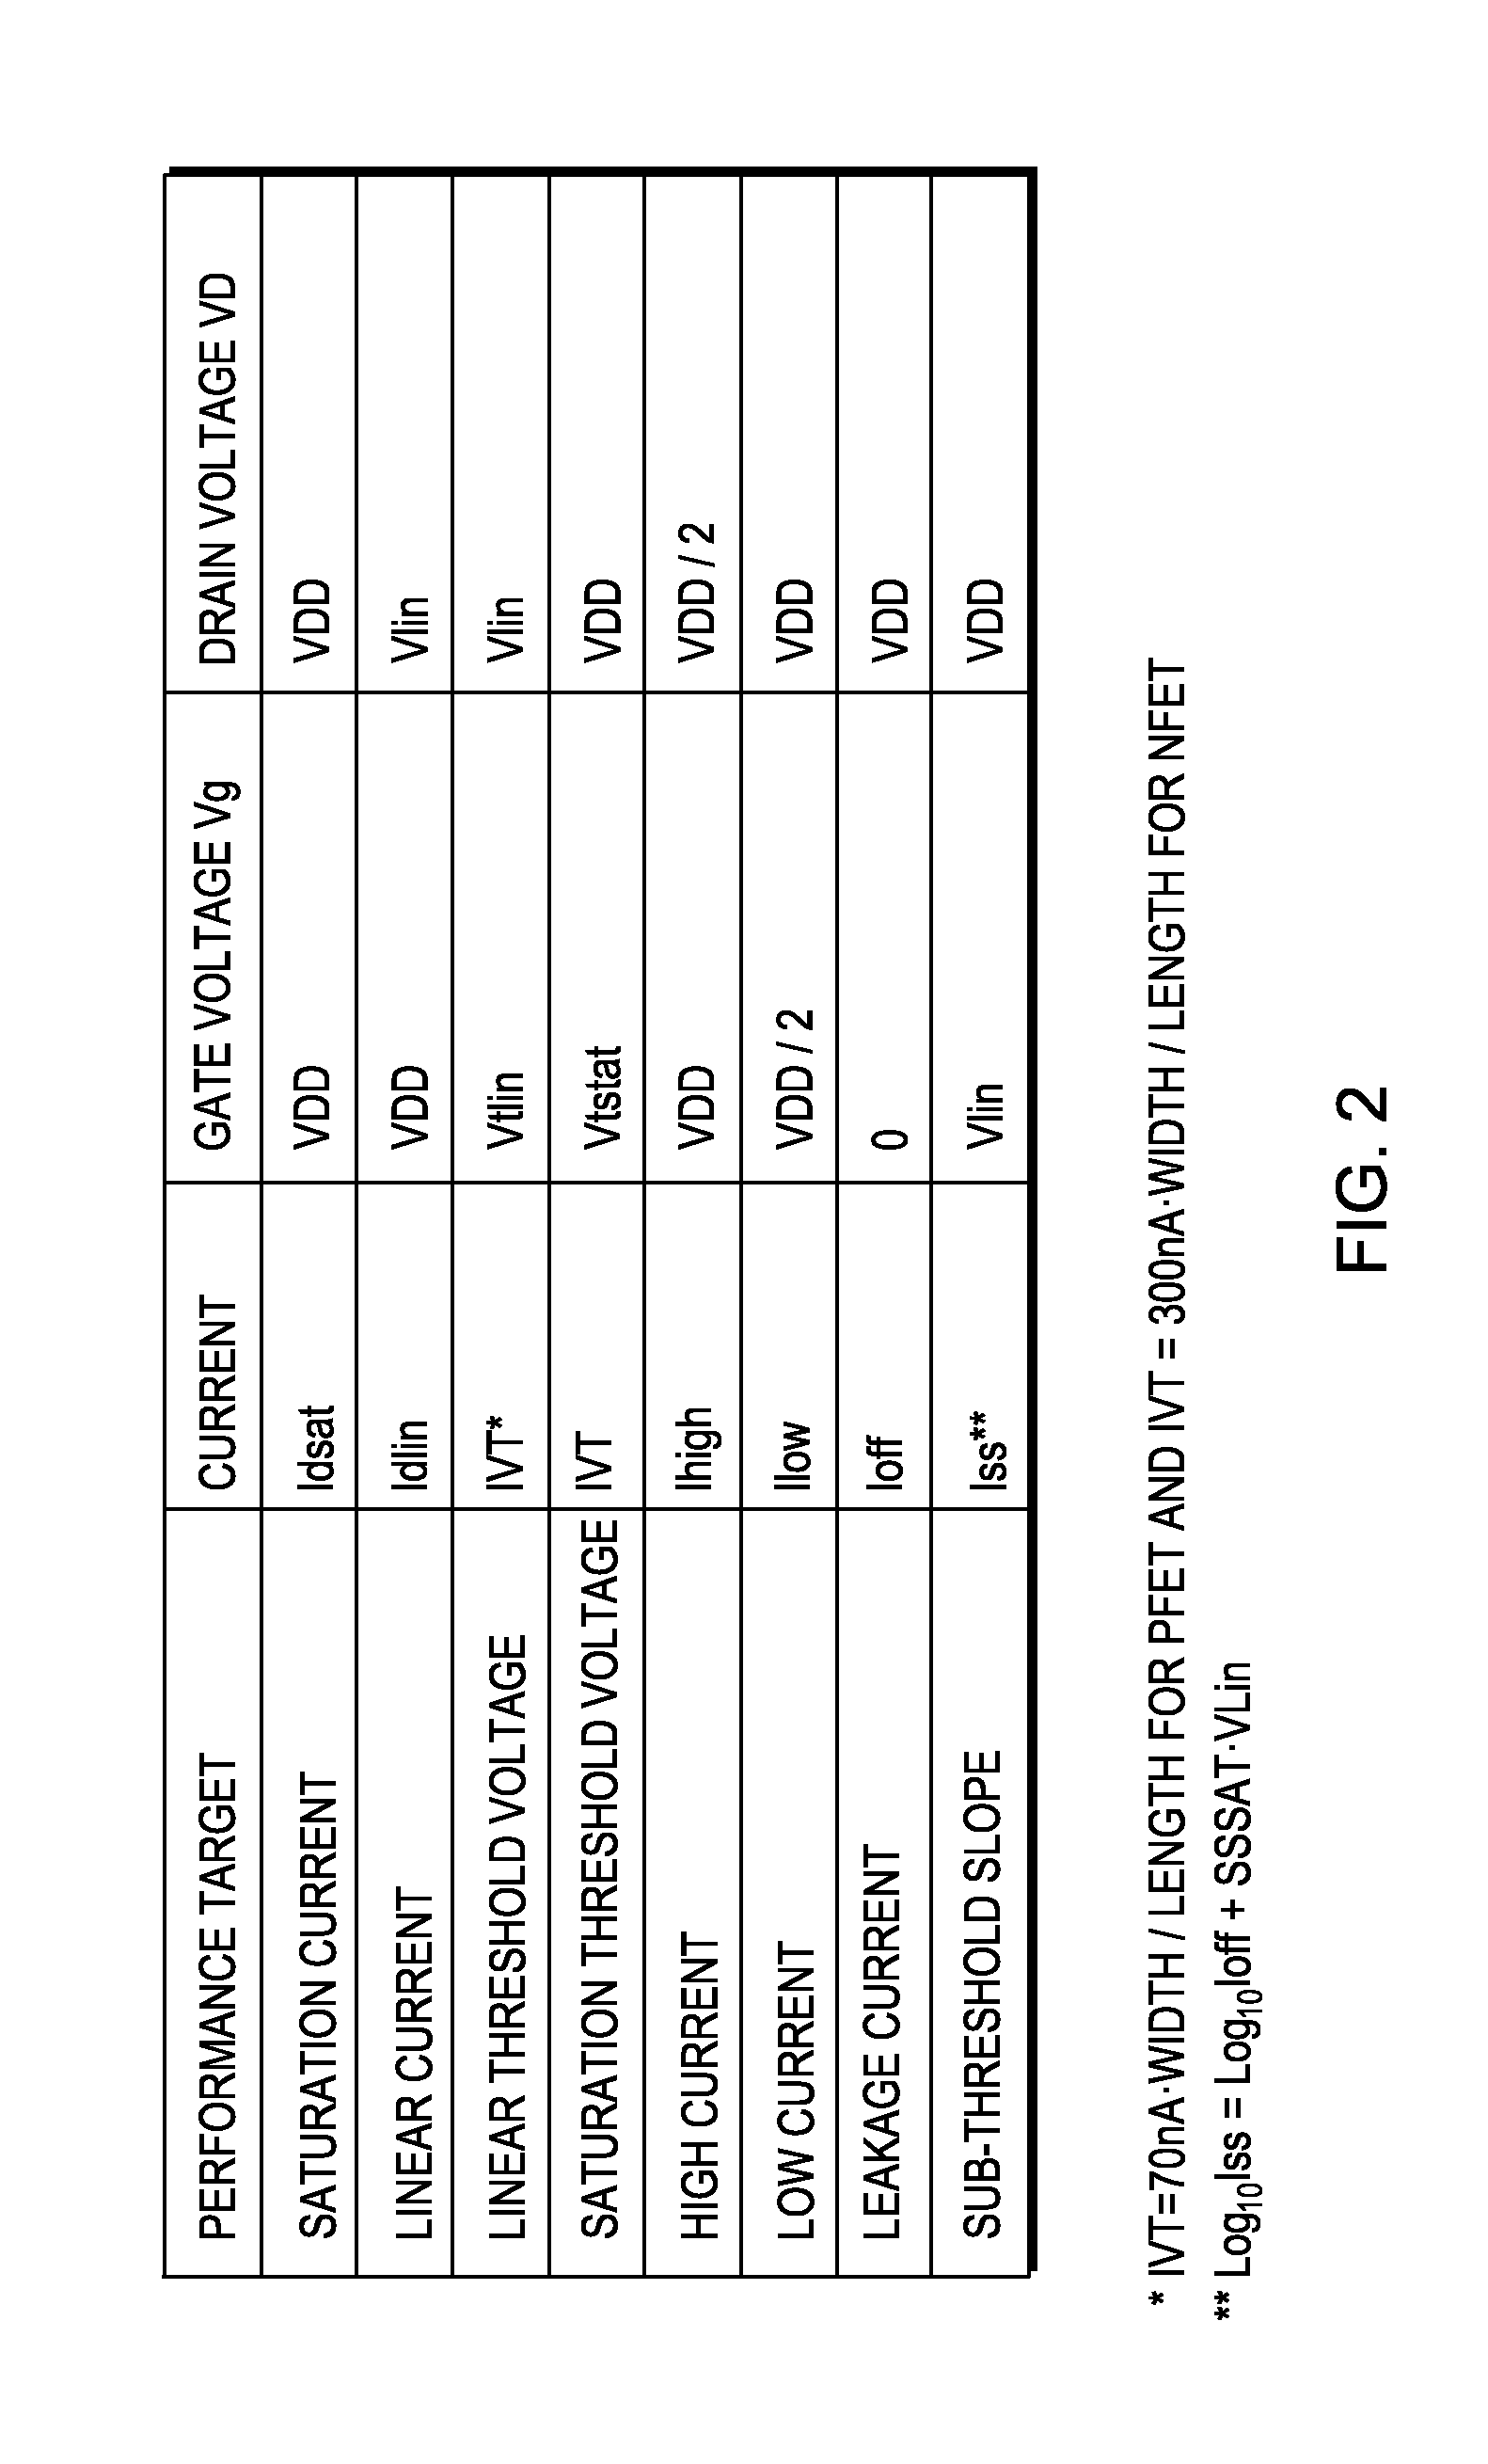 Method, system and program storage device for generating accurate performance targets for active semiconductor devices during new technology node development